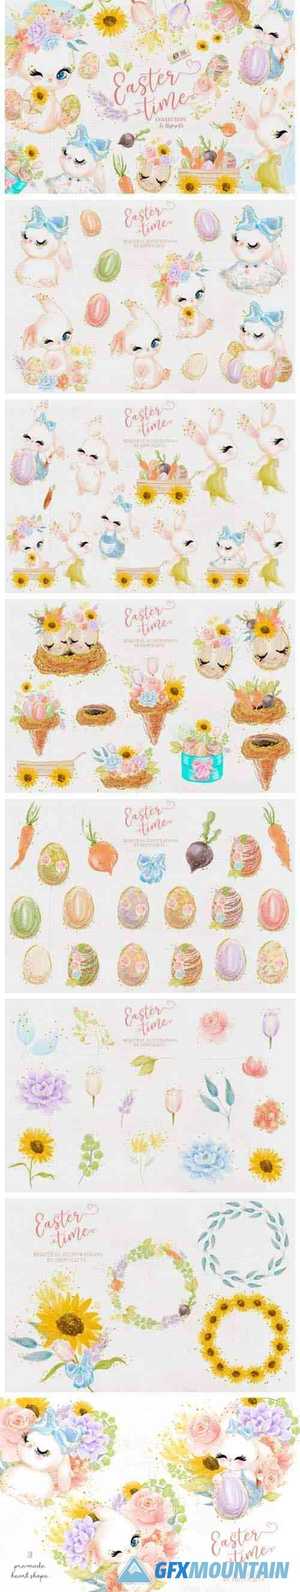 Easter Bunny Clipart 2980887